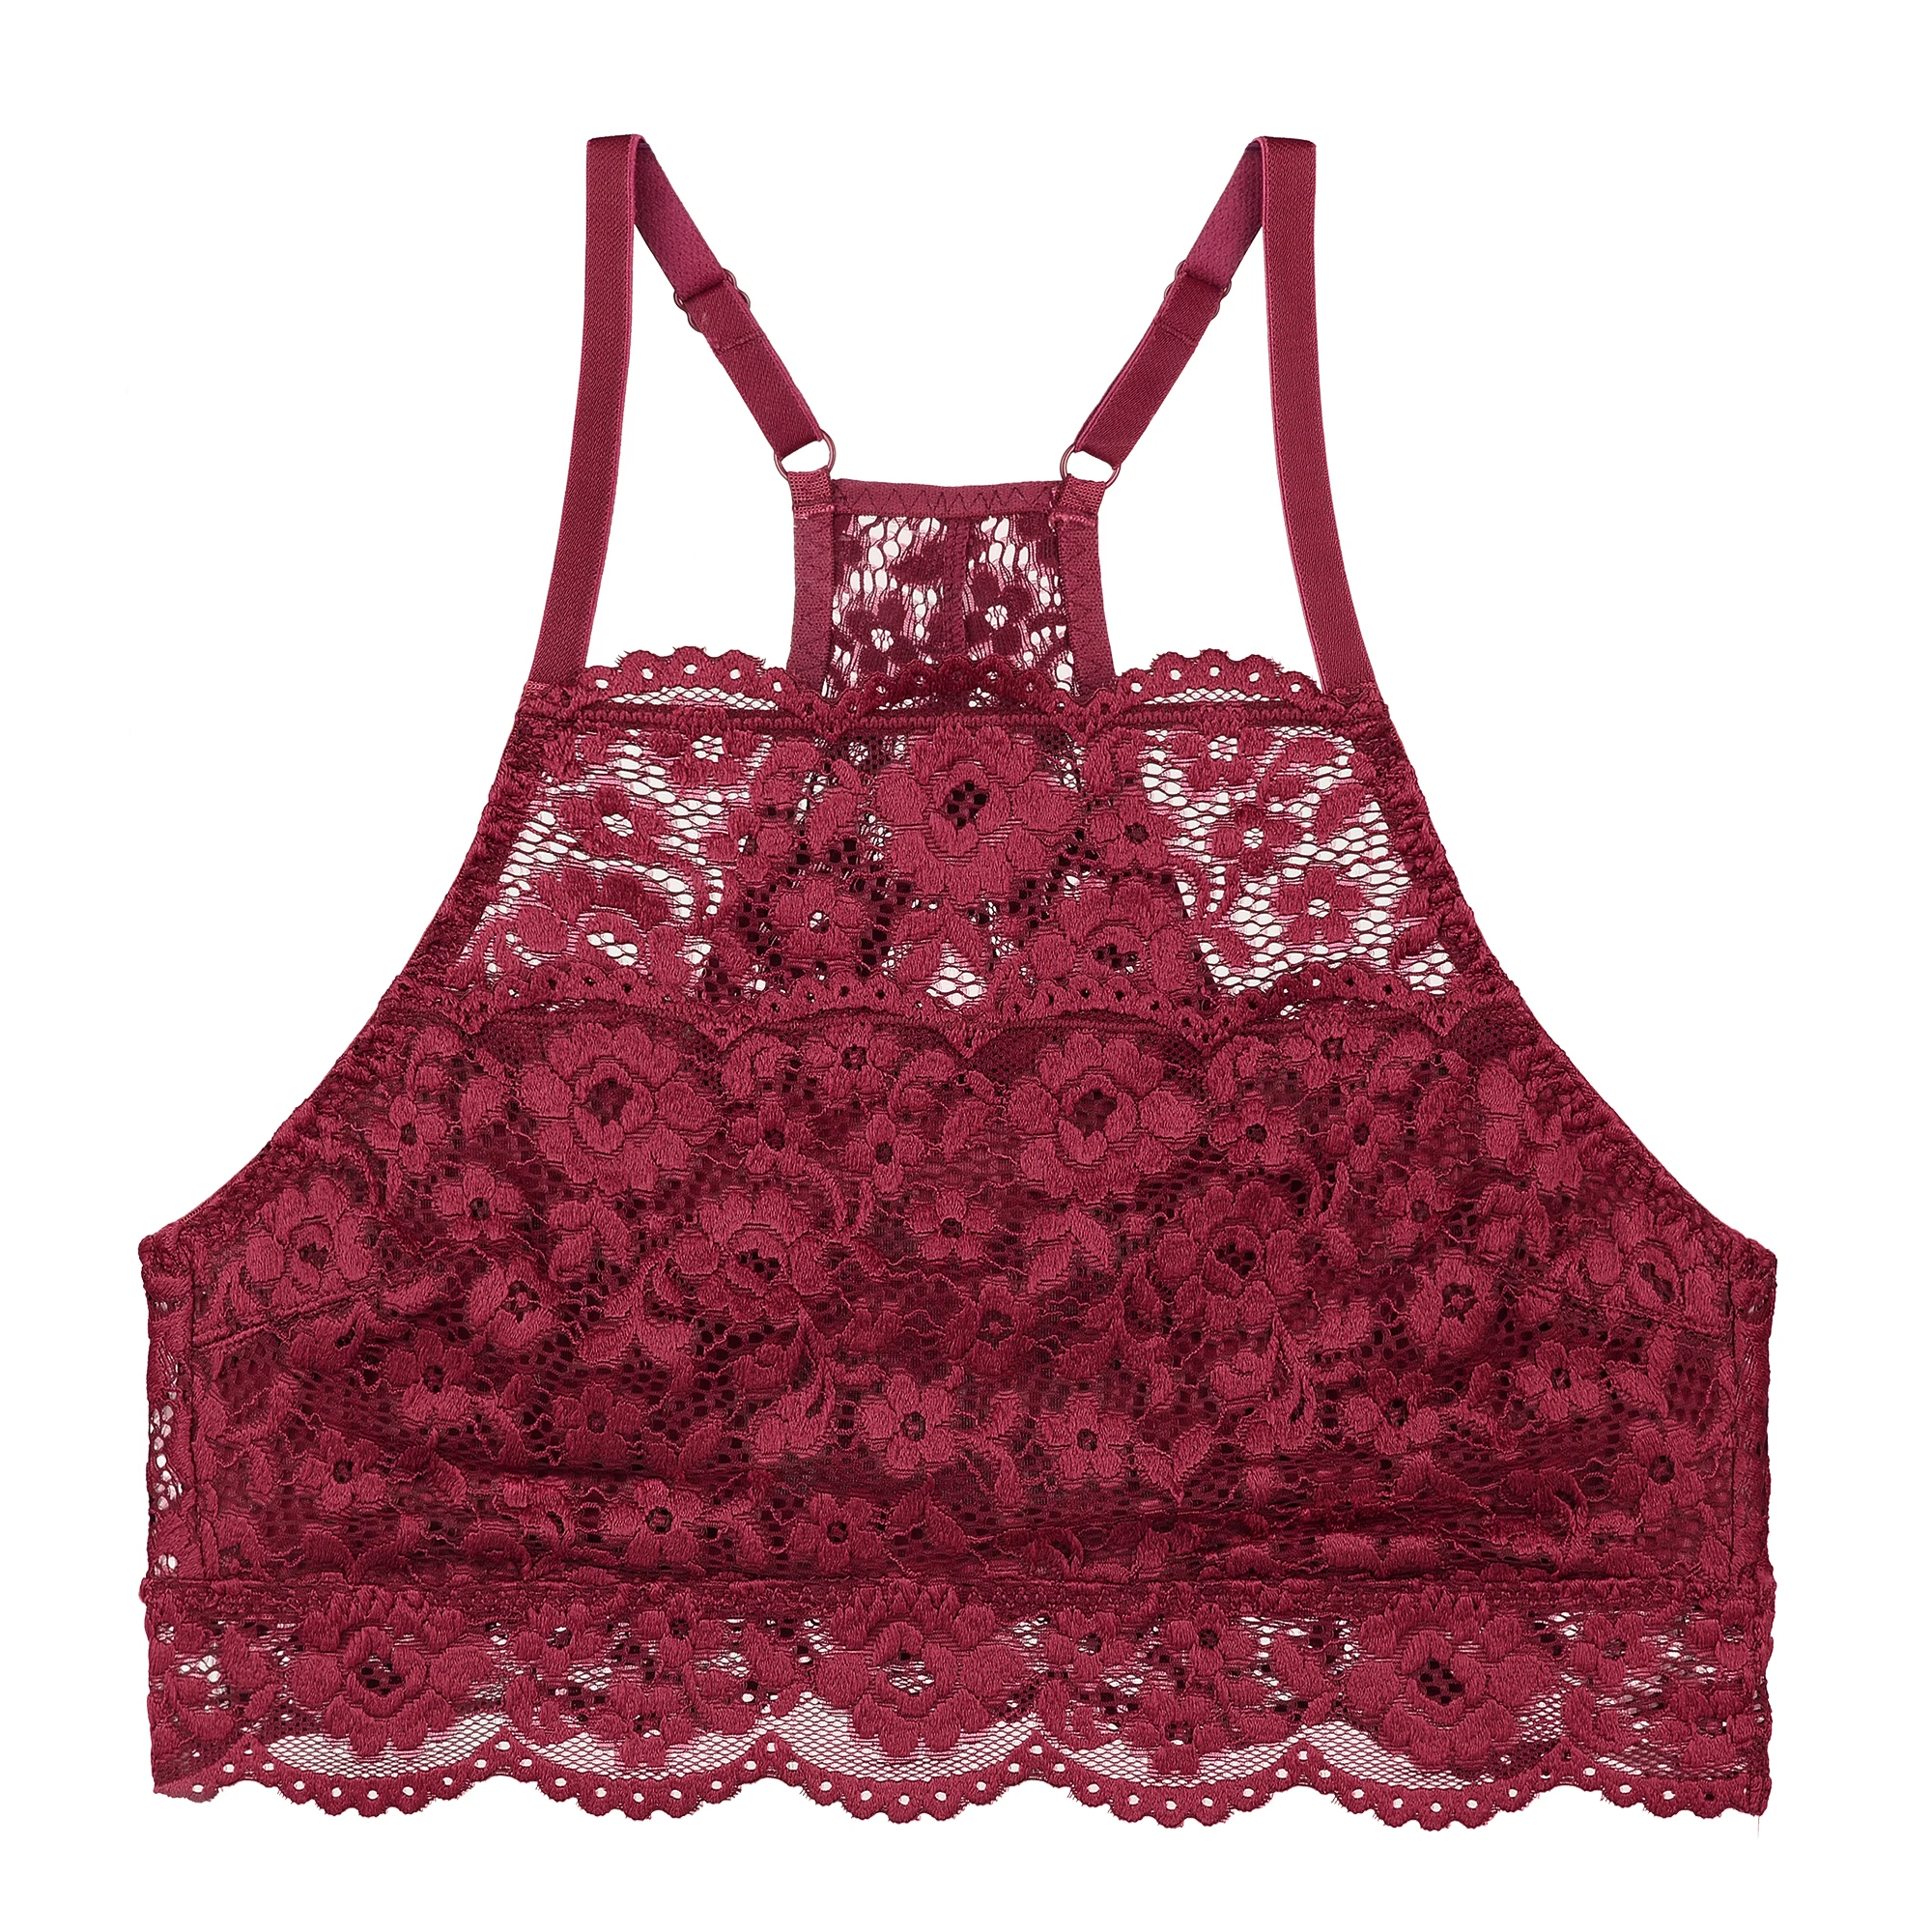  Womens Lace Racerback Bralette Sexy Cami Crop Top Pink